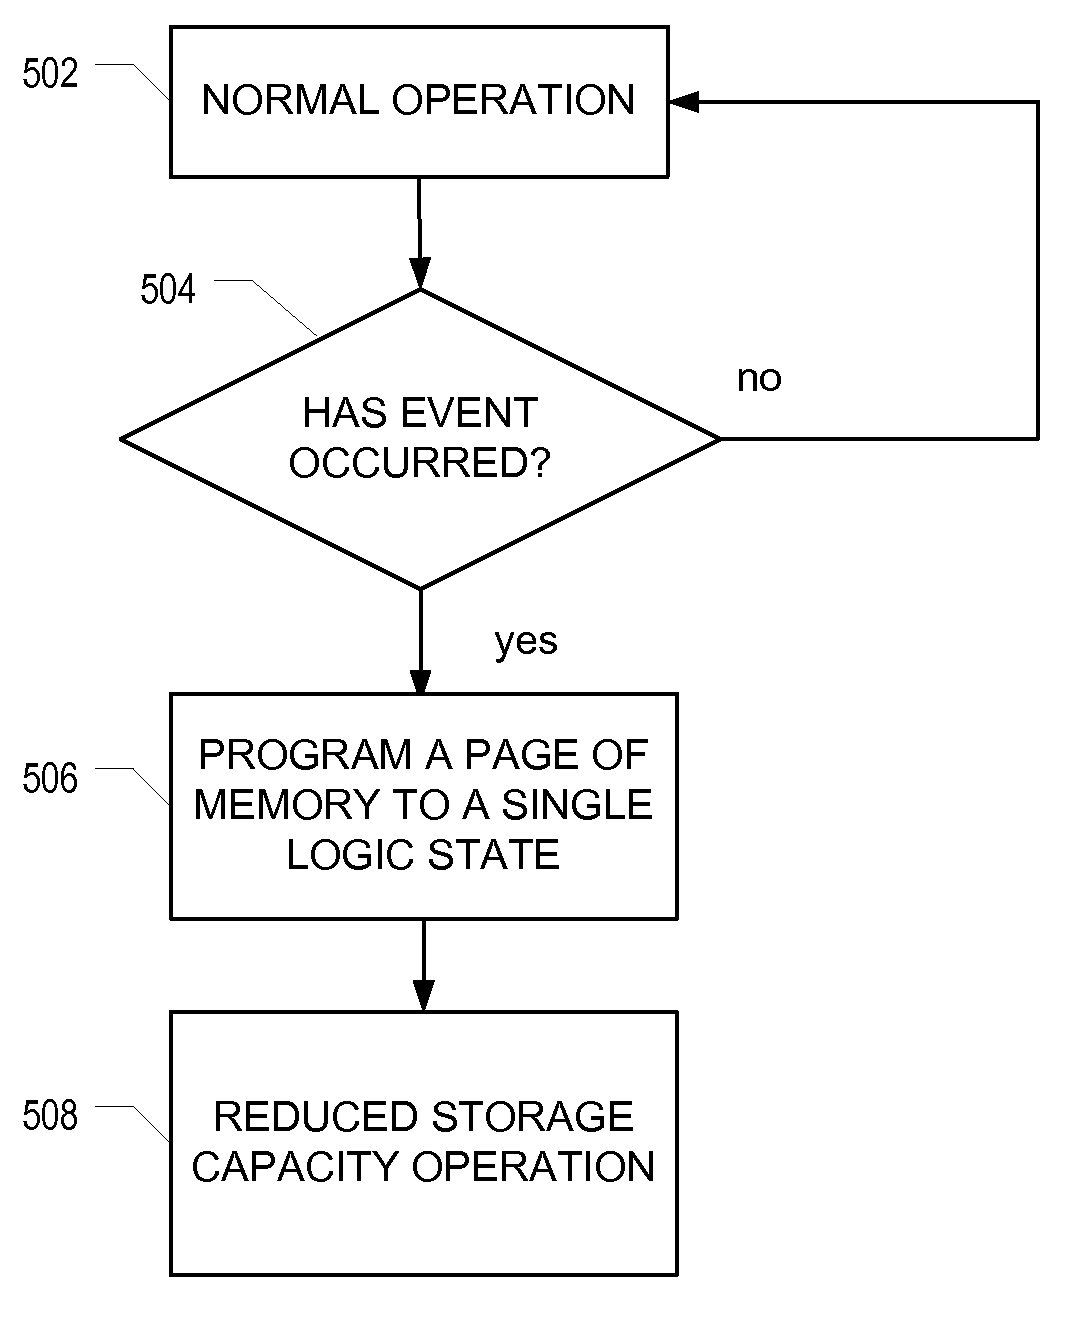 Technique to improve and extend endurance and reliability of multi-level memory cells in a memory device